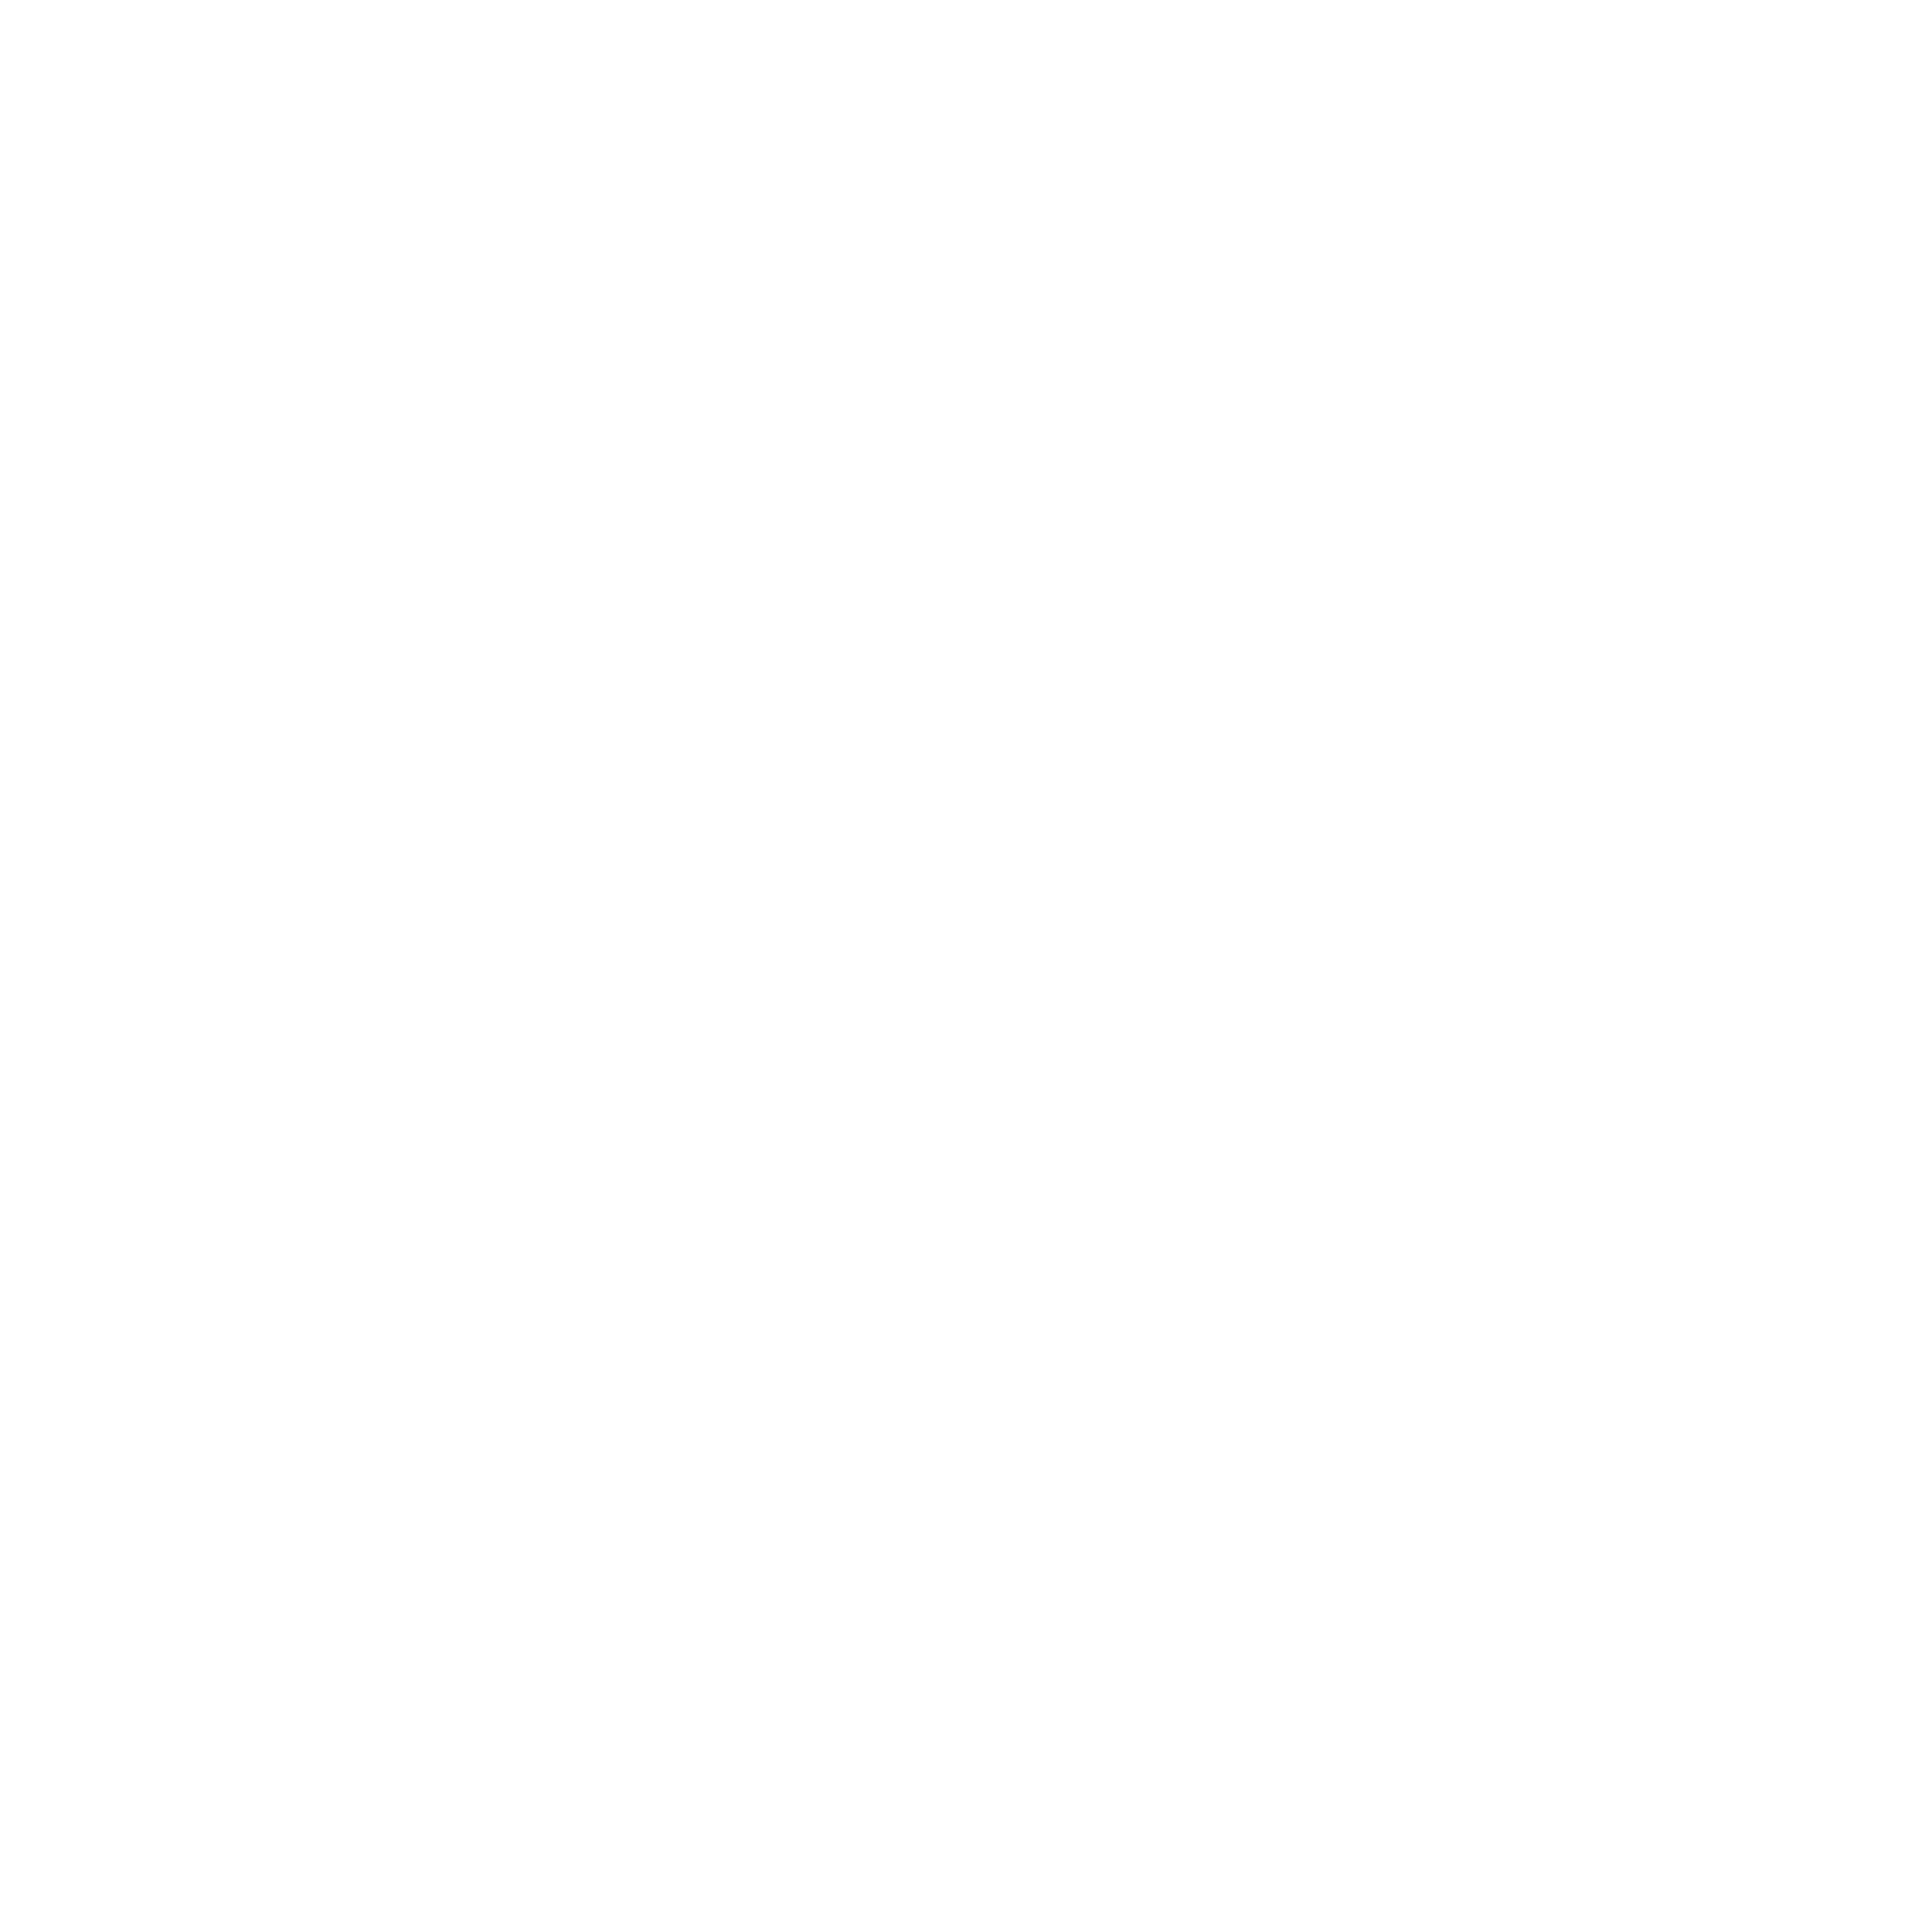 AutoIgnite™ Series 545 Digital Charcoal Grill and Smoker Spec Image